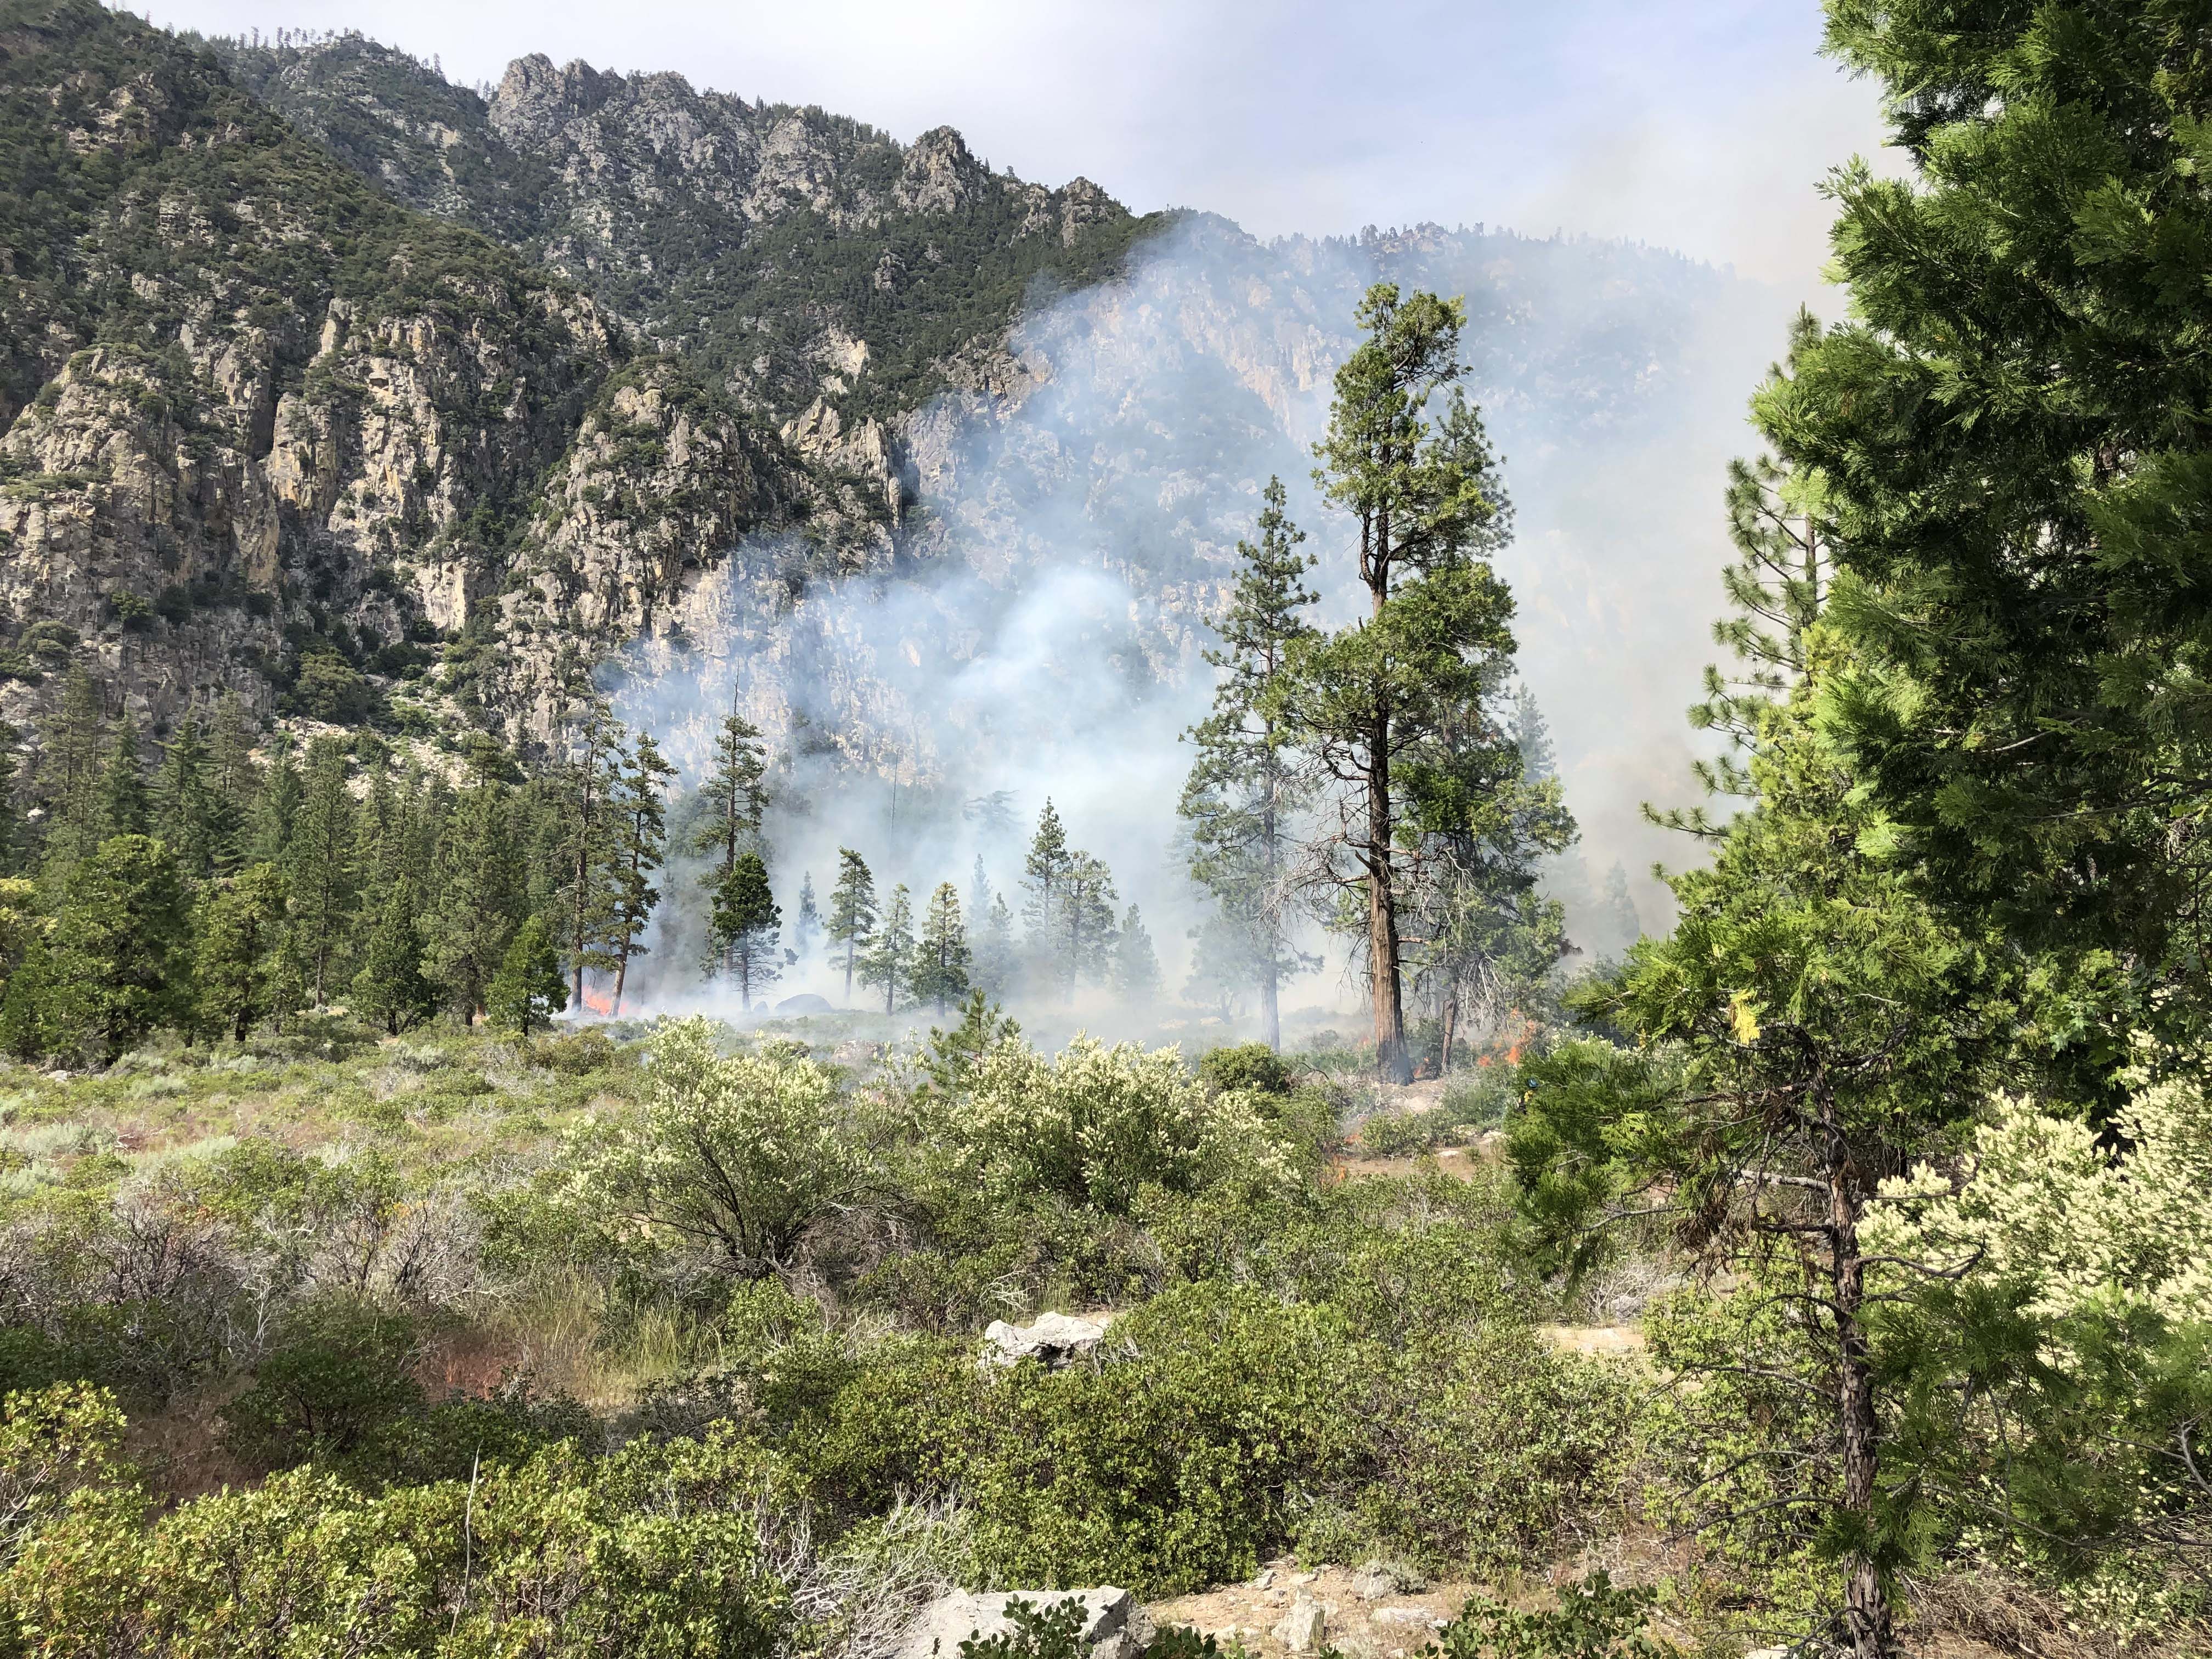 Smoke rises from shrub and woodland in front of a granite rockface